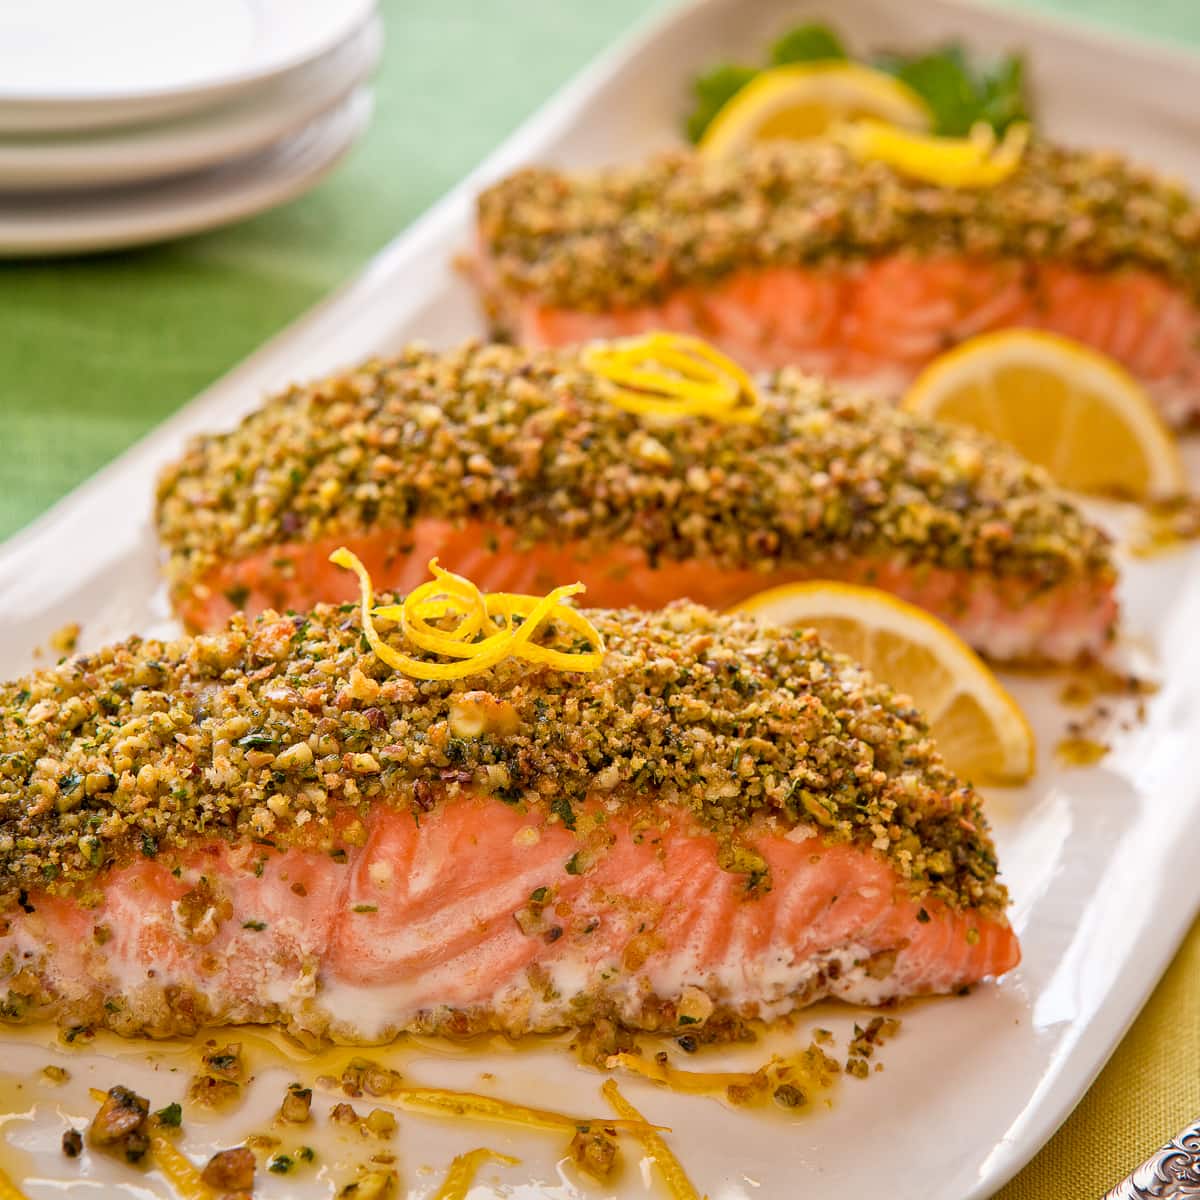 Baked salmon with pistachio crust